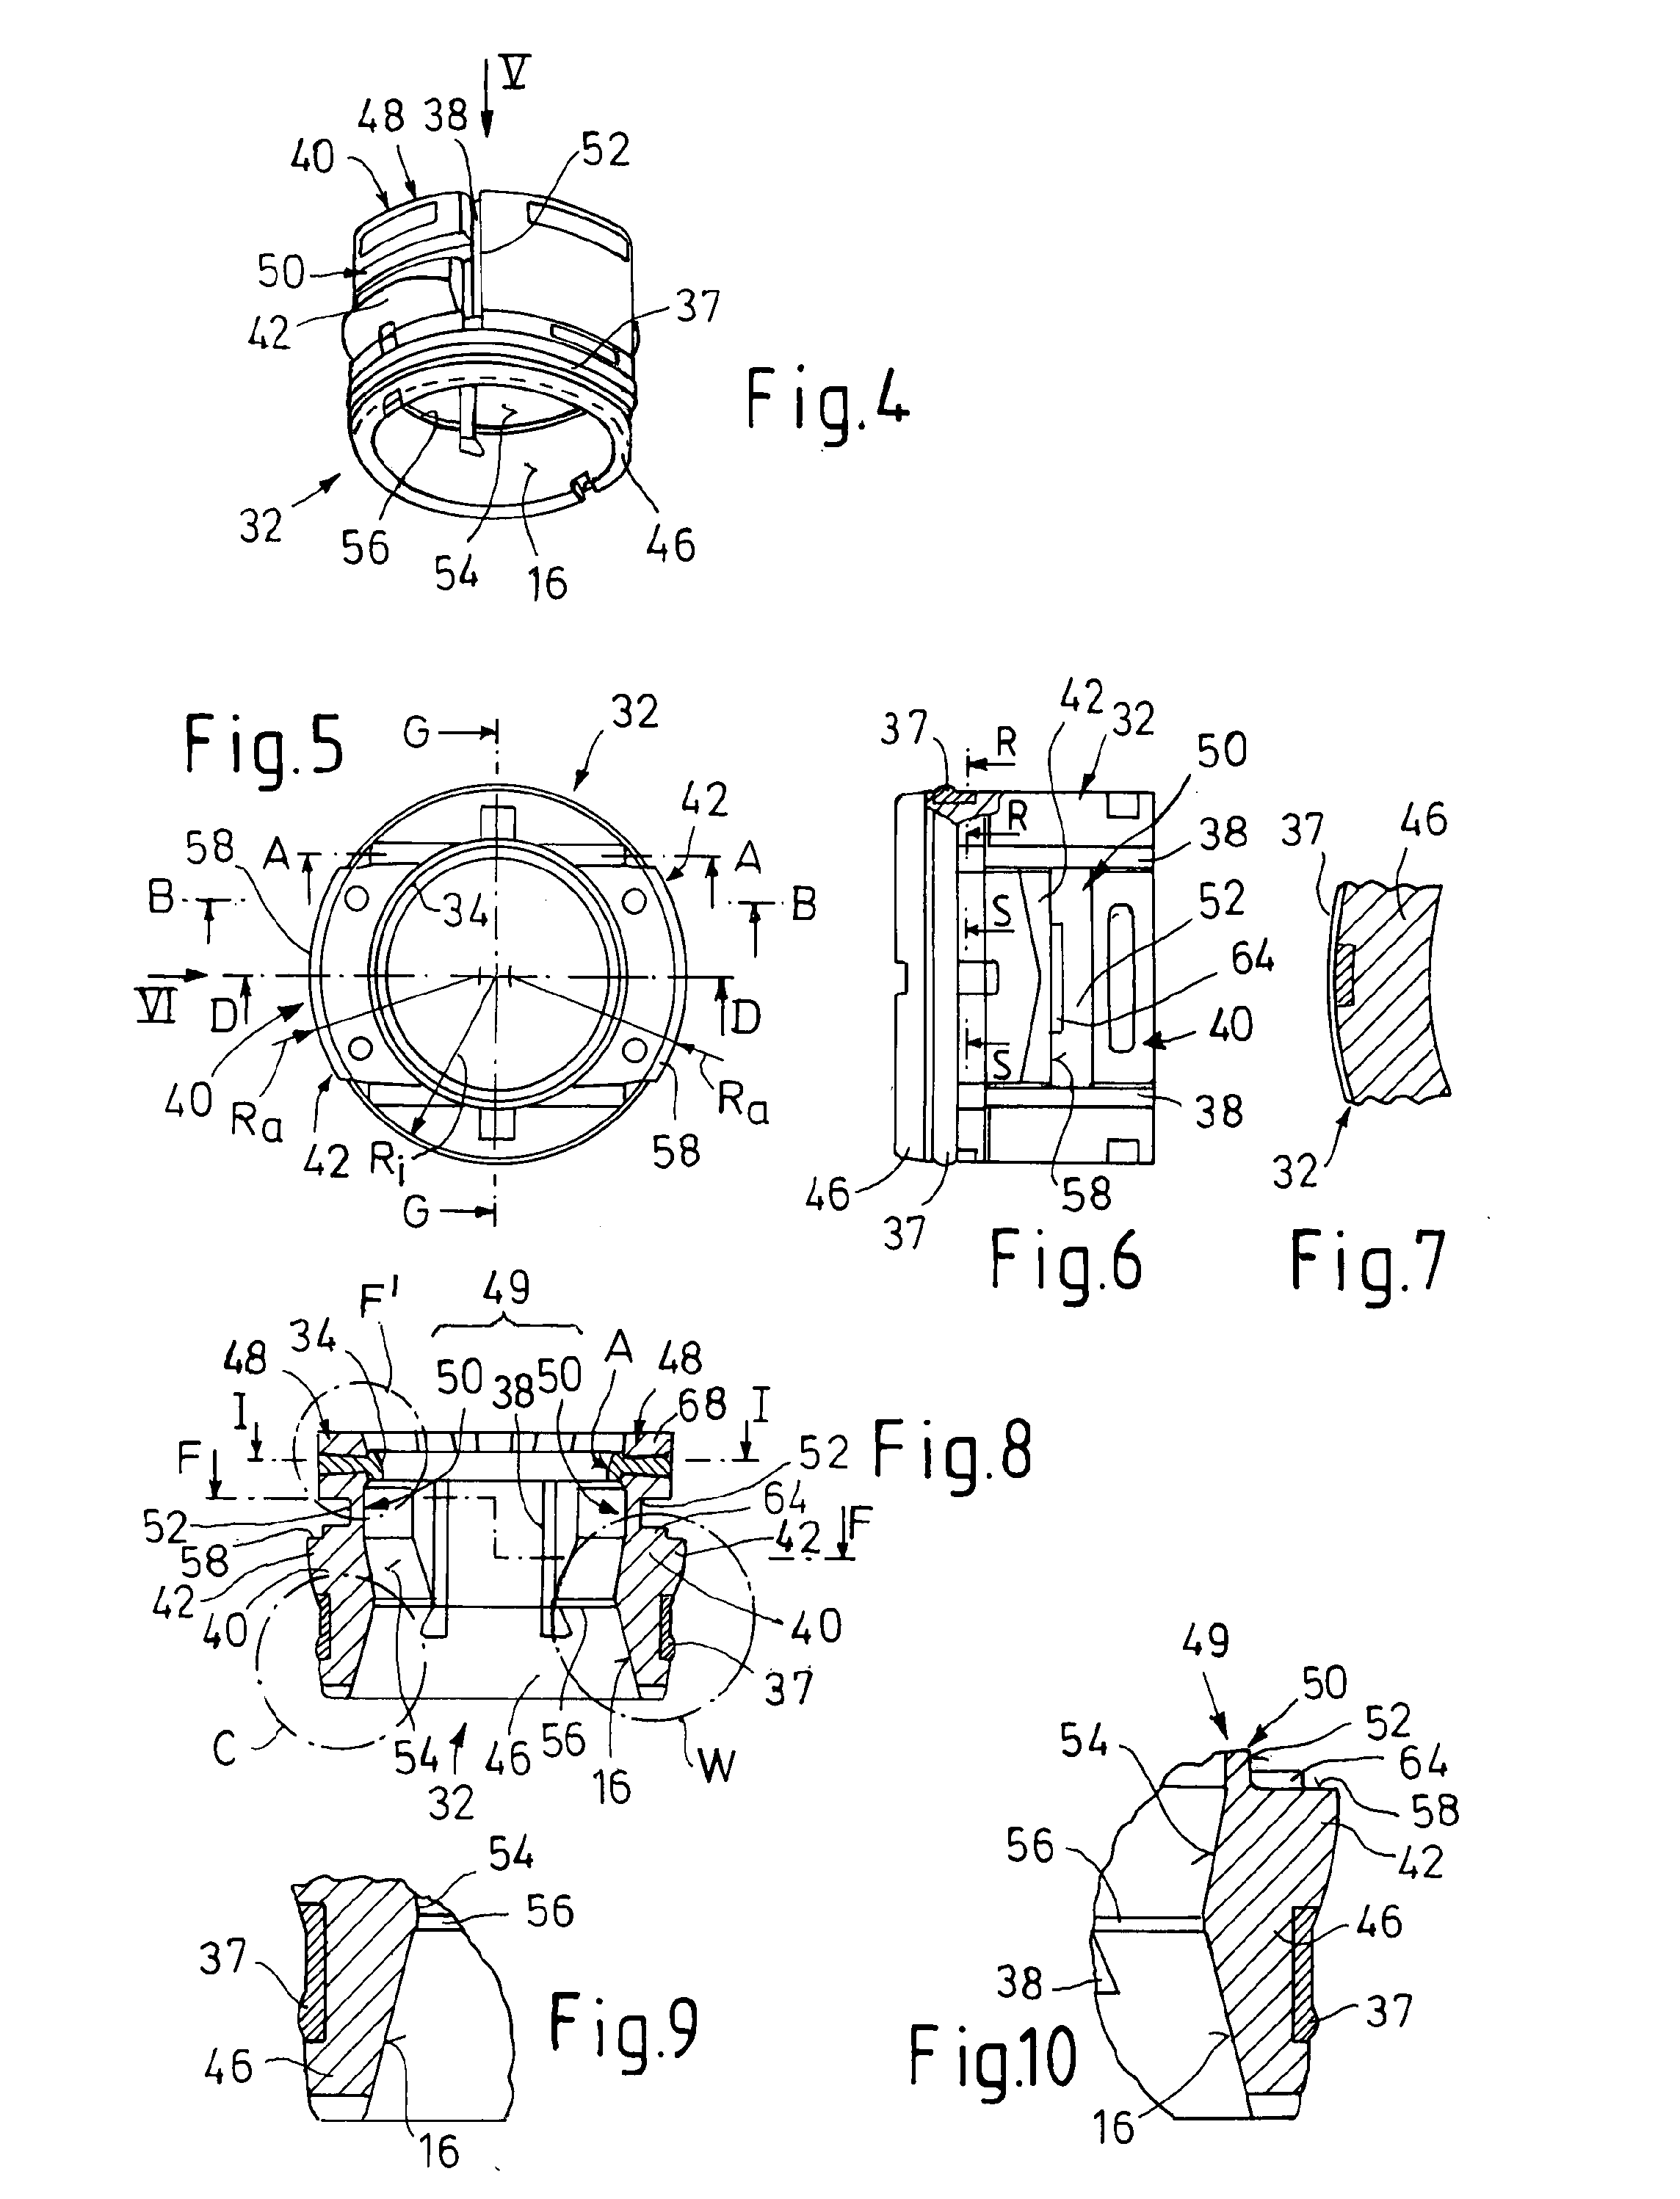 Connector Device for Media Conduits